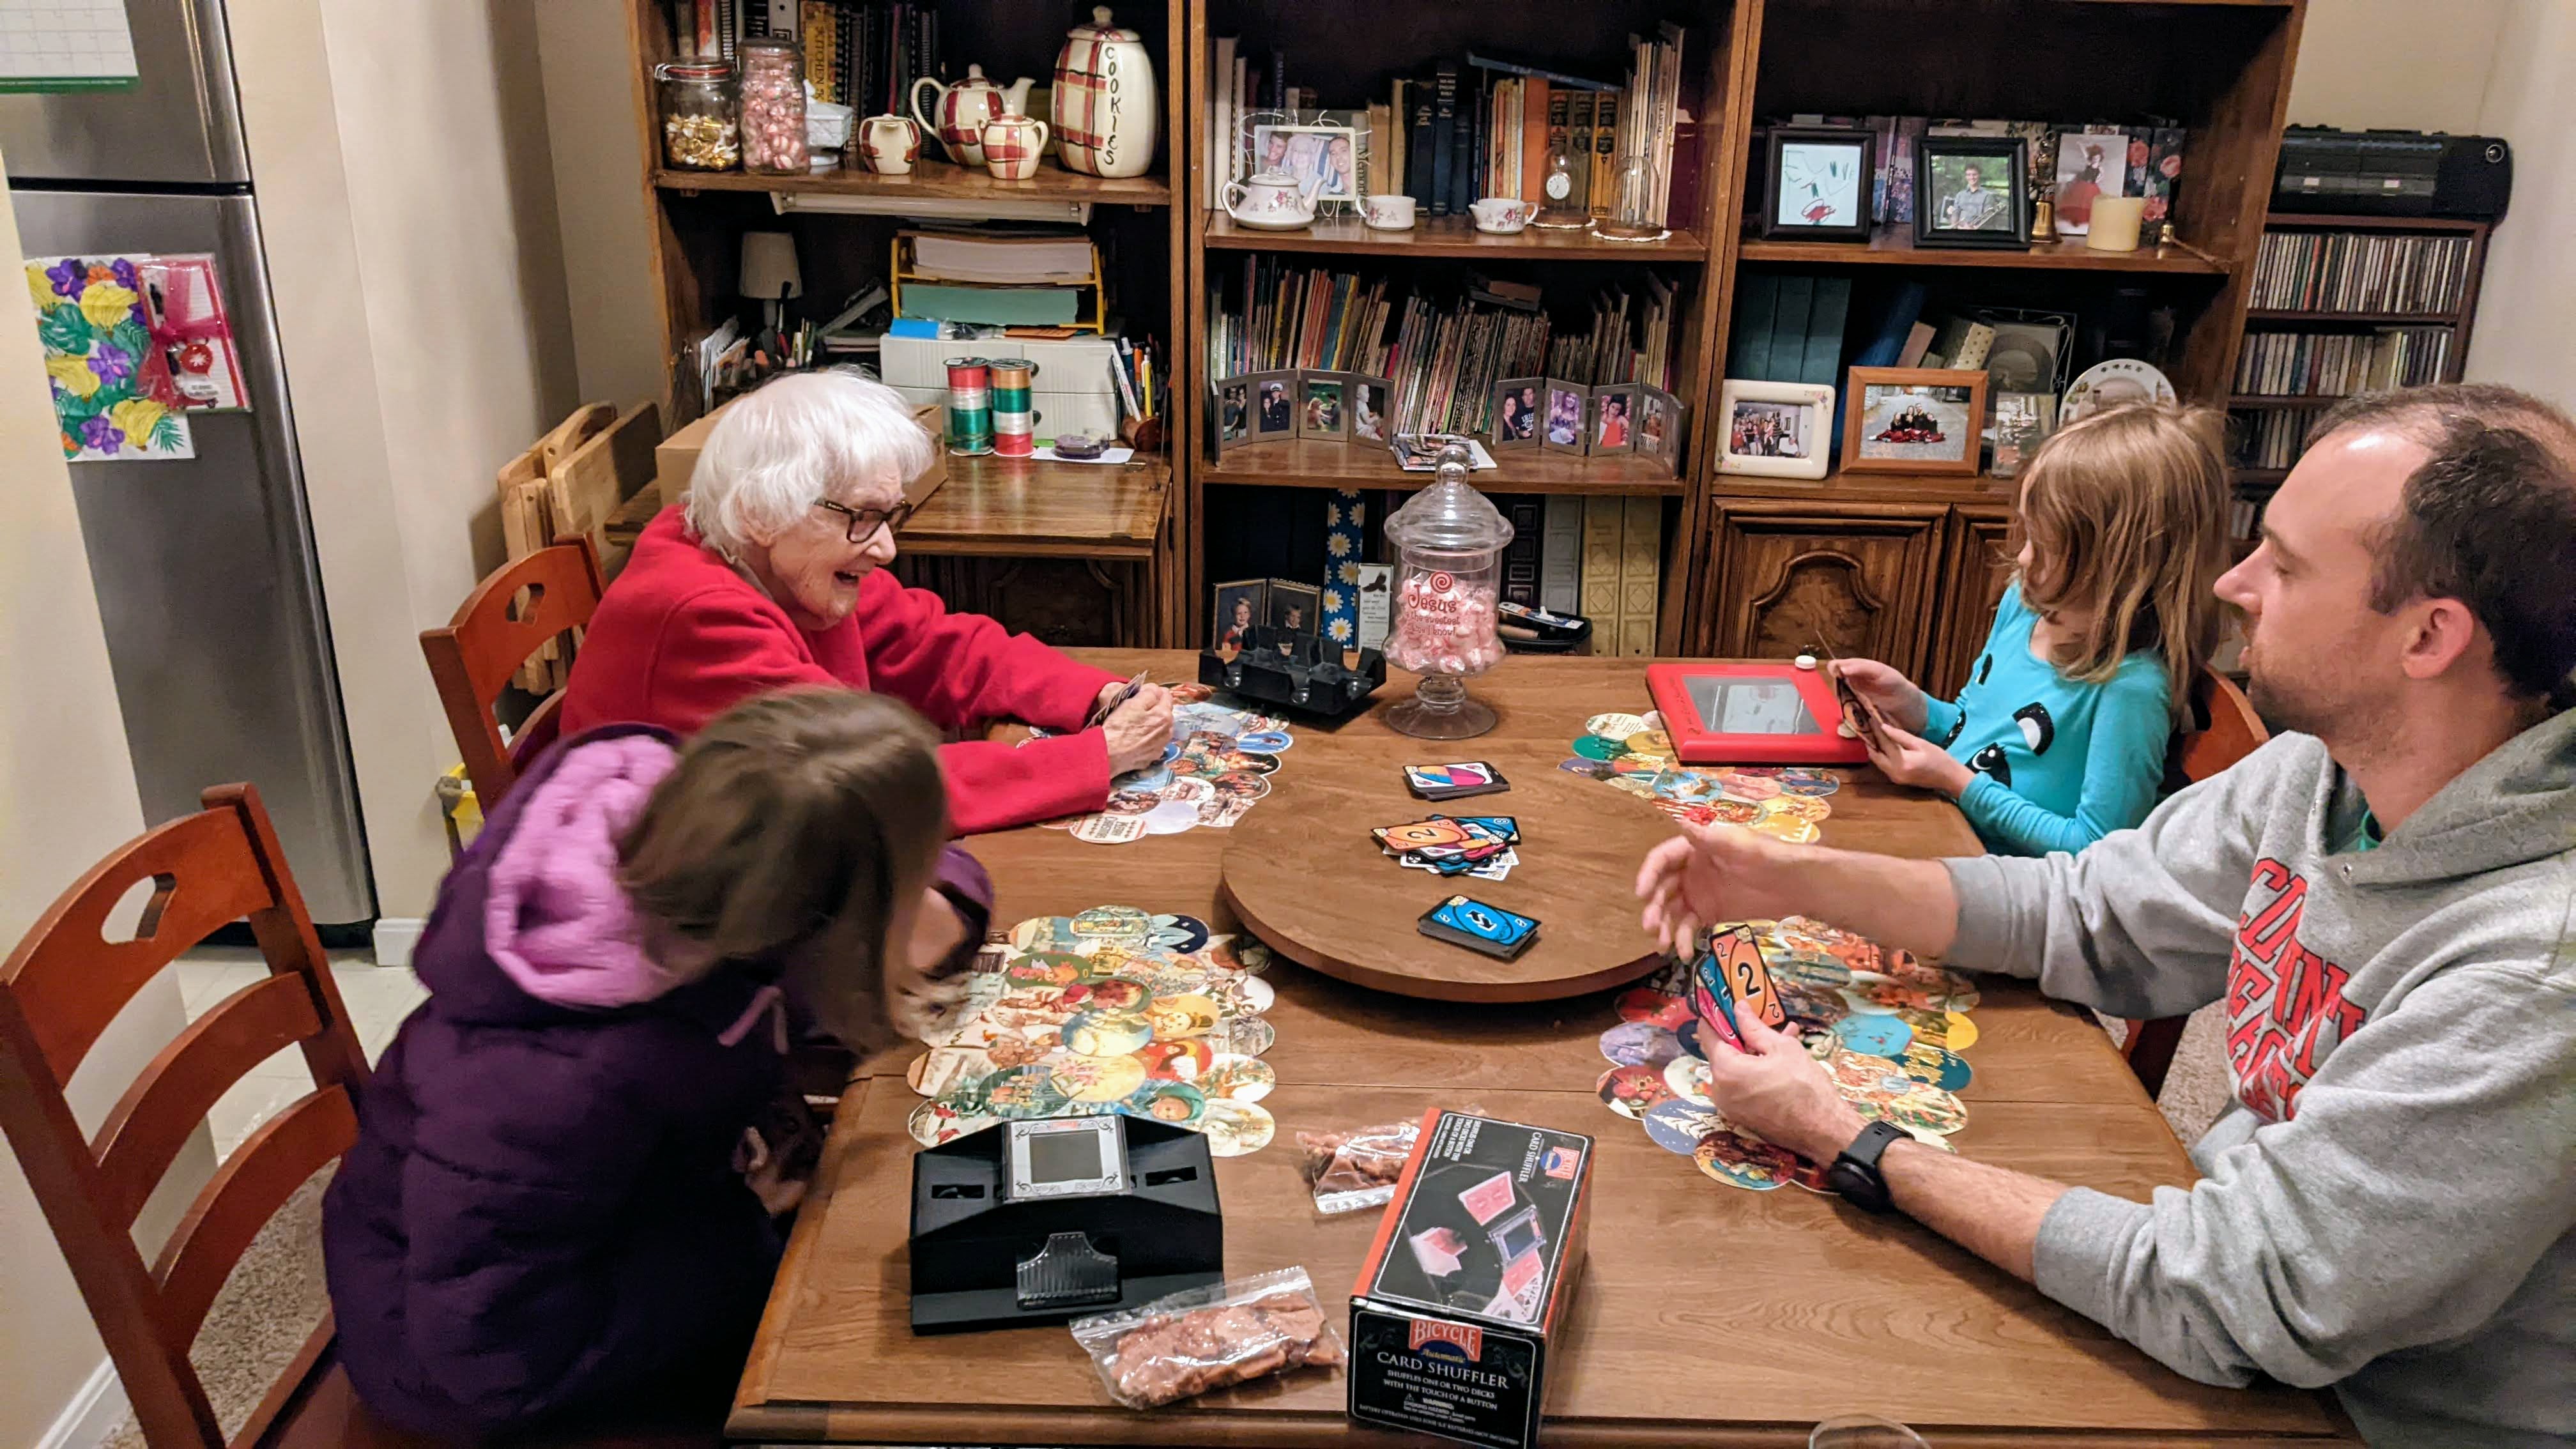 Playing cards with Grandma